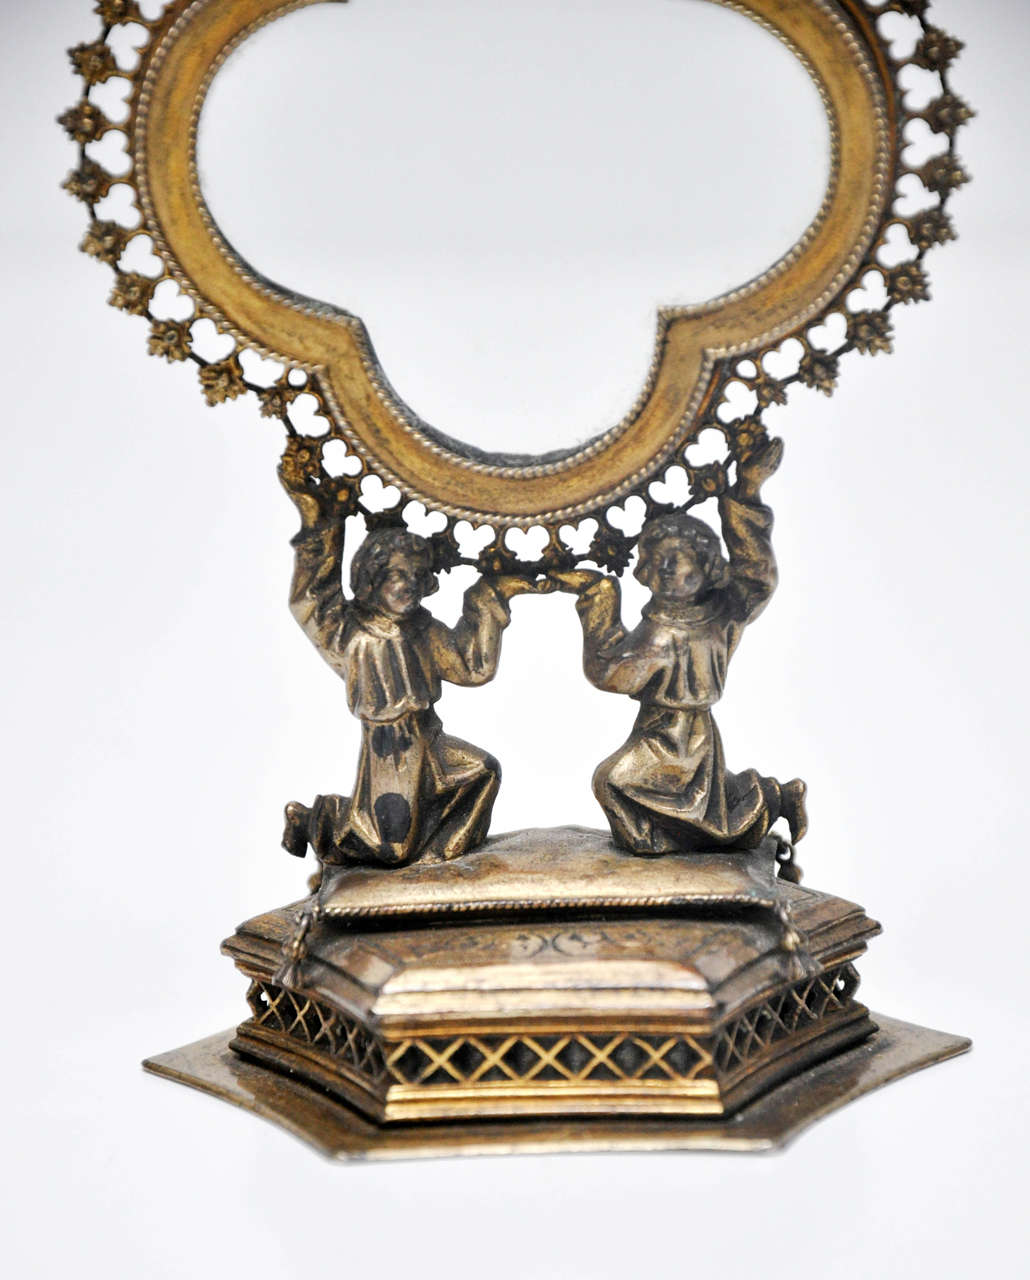 Superb and Crisply Decorated Gilt Bronze Reliquary, France circa 1550 In Excellent Condition For Sale In Lake Forest, IL